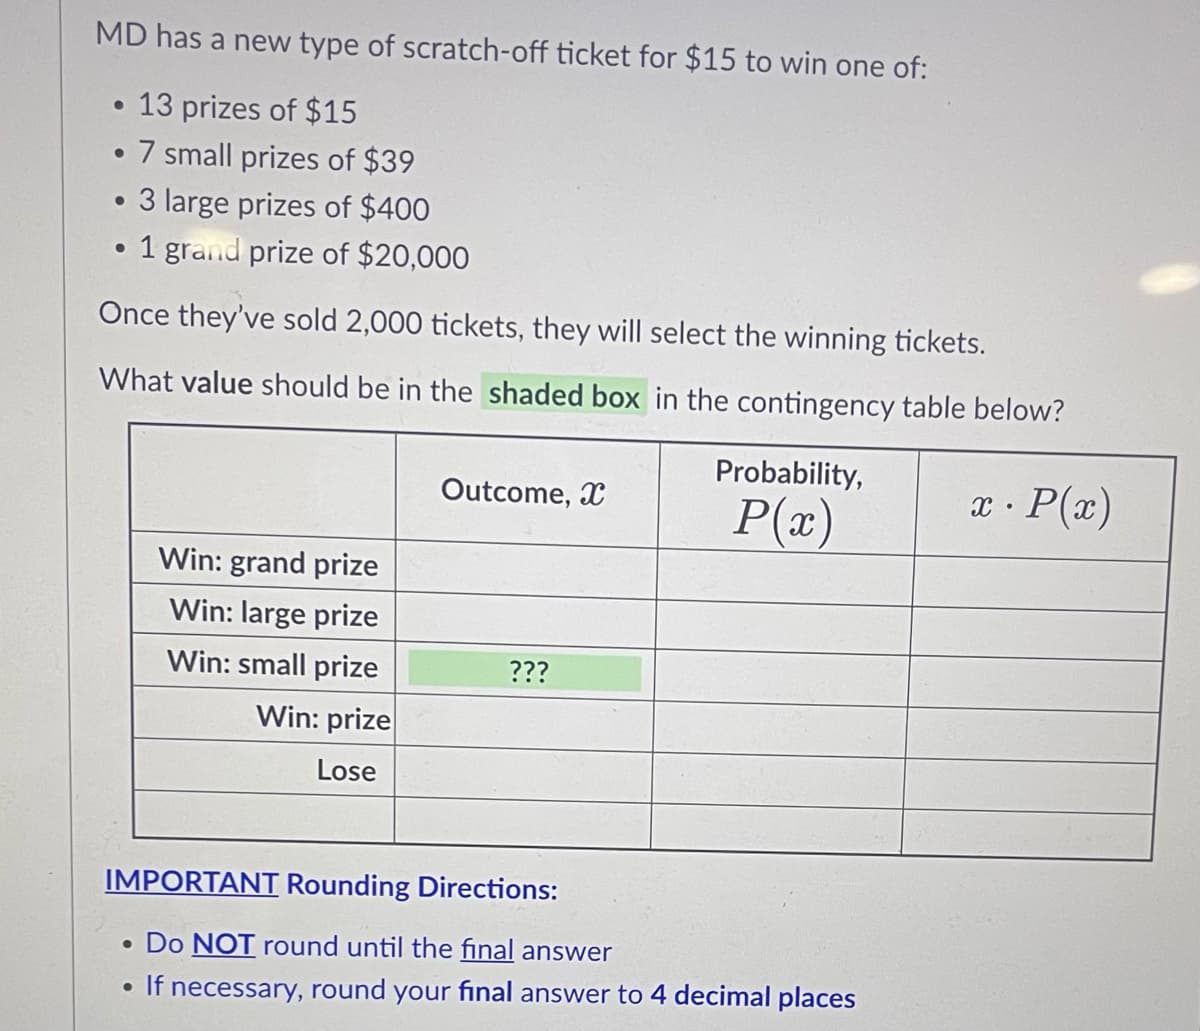 MD has a new type of scratch-off ticket for $15 to win one of:
13 prizes of $15
• 7 small prizes of $39
3 large prizes of $400
1 grand prize of $20,000
Once they've sold 2,000 tickets, they will select the winning tickets.
What value should be in the shaded box in the contingency table below?
Probability,
Outcome, X
x· P(x)
P(x)
Win: grand prize
Win: large prize
Win: small prize
???
Win: prize
Lose
IMPORTANT Rounding Directions:
• Do NOT round until the final answer
• If necessary, round your final answer to 4 decimal places
